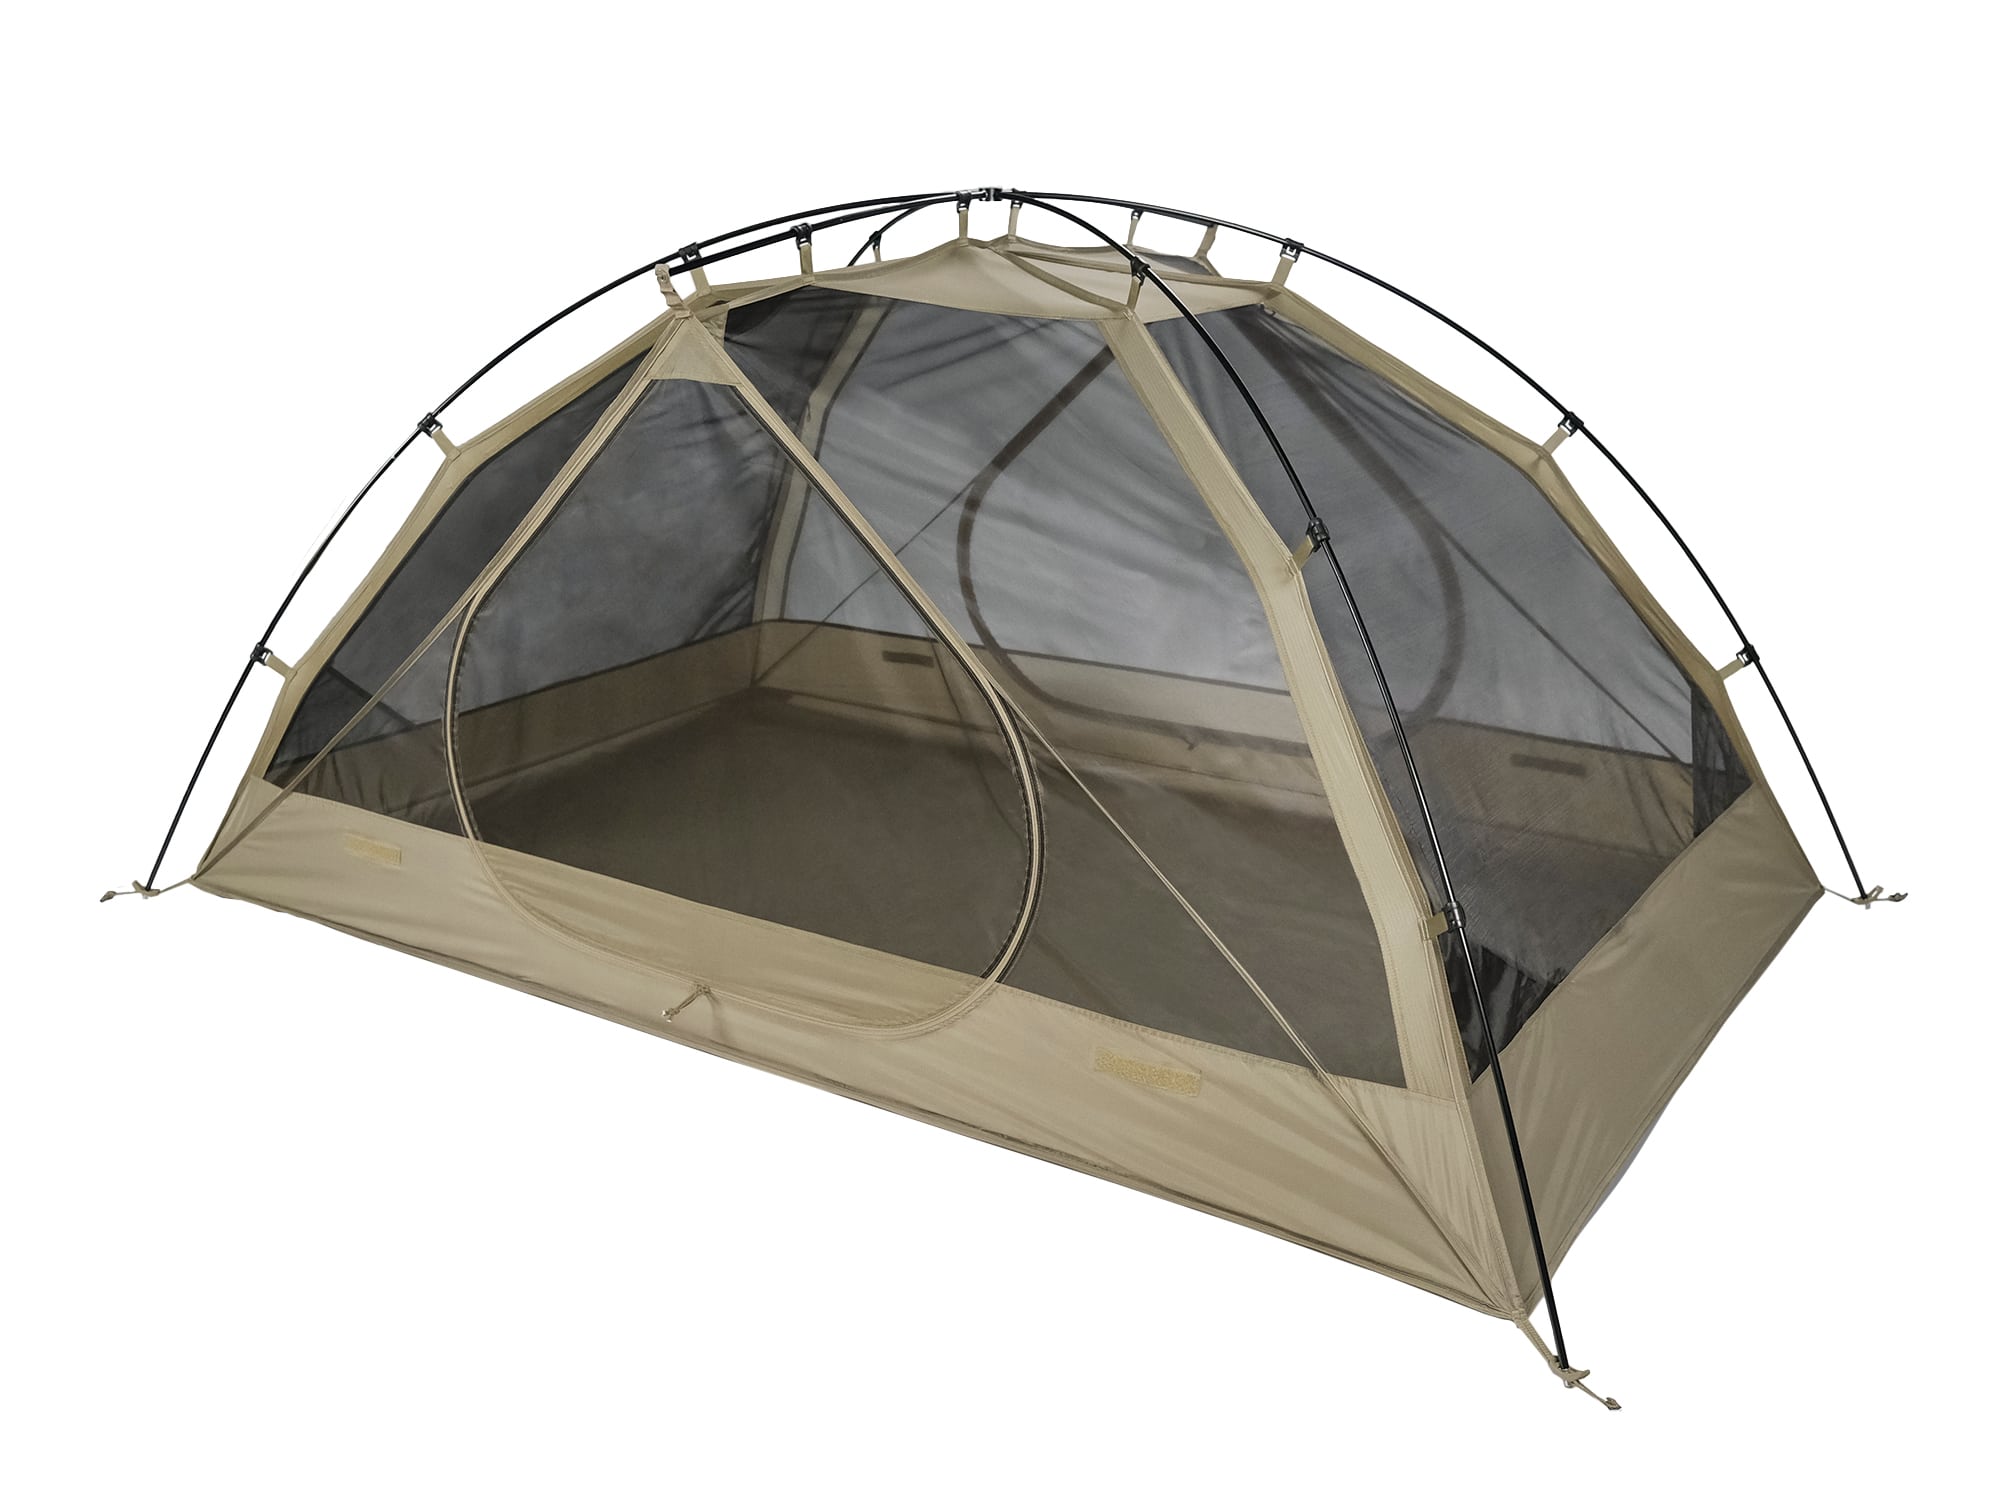 FIDO 2 Person Shelter System